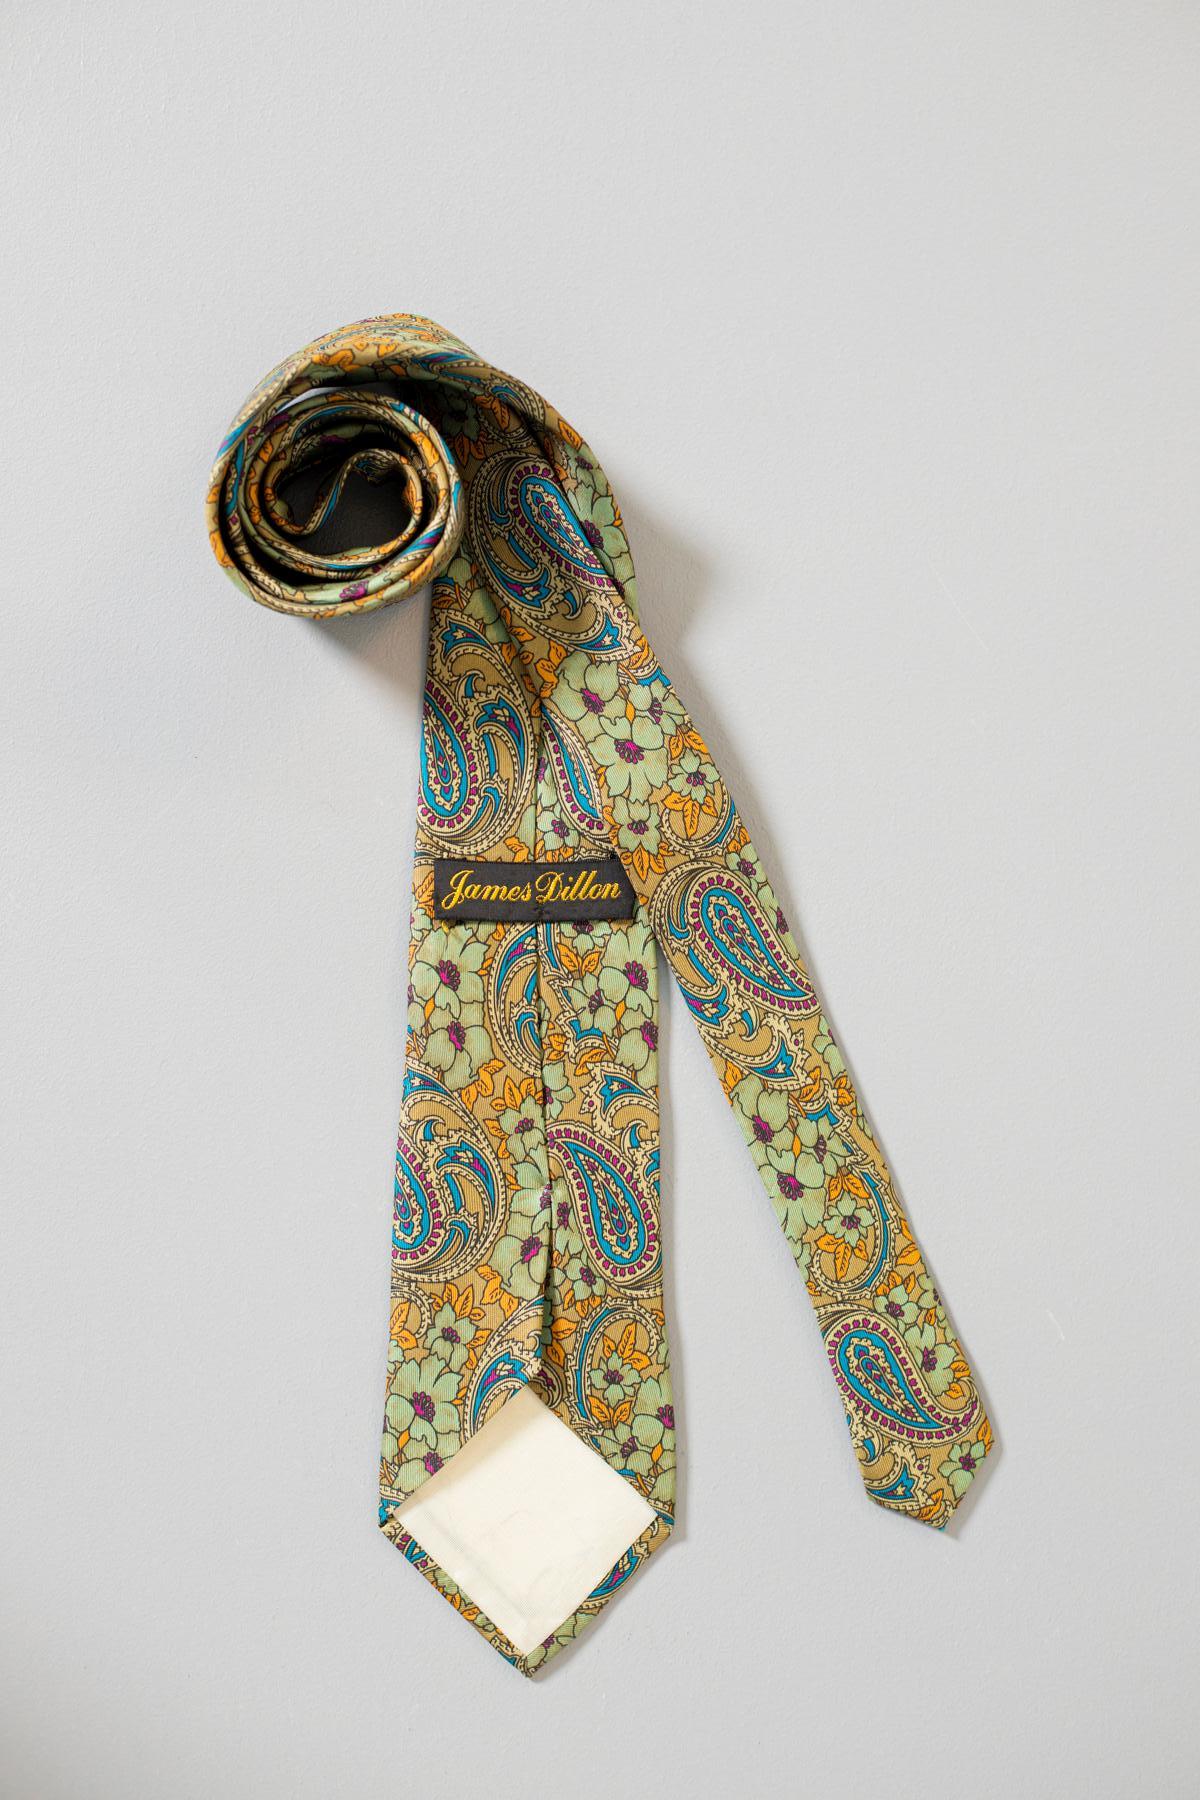 Vintage 100% silk tie by James Dillon In Good Condition For Sale In Milano, IT